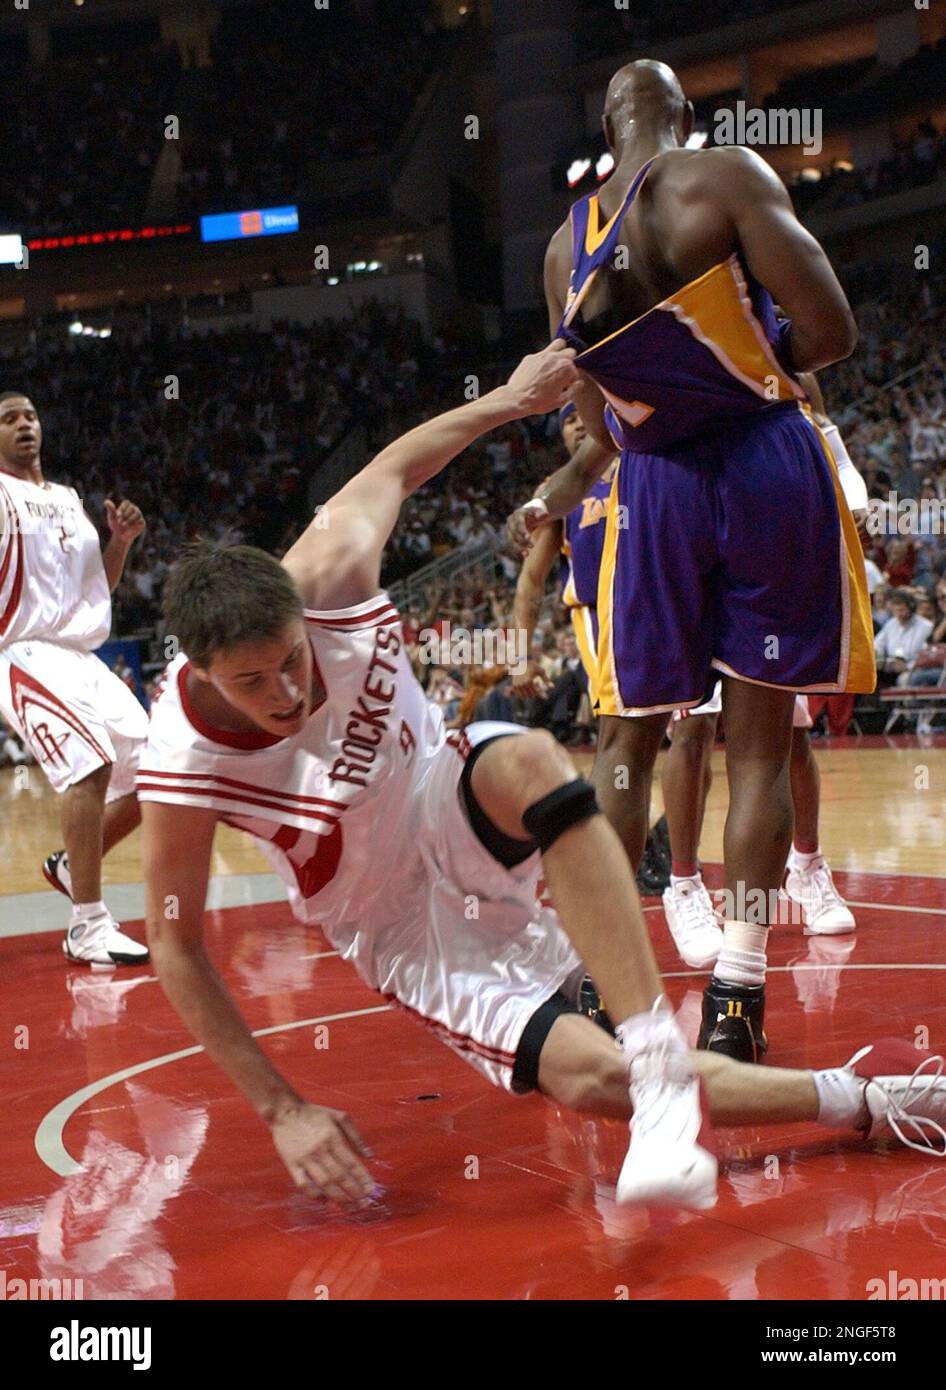 Houston Rockets' Bostjan Nachbar (9), of Slovenia, rips the jersey of Los  Angeles Lakers' Karl Malone after being fouled while going up for a shot  during the second quarter in Game 4